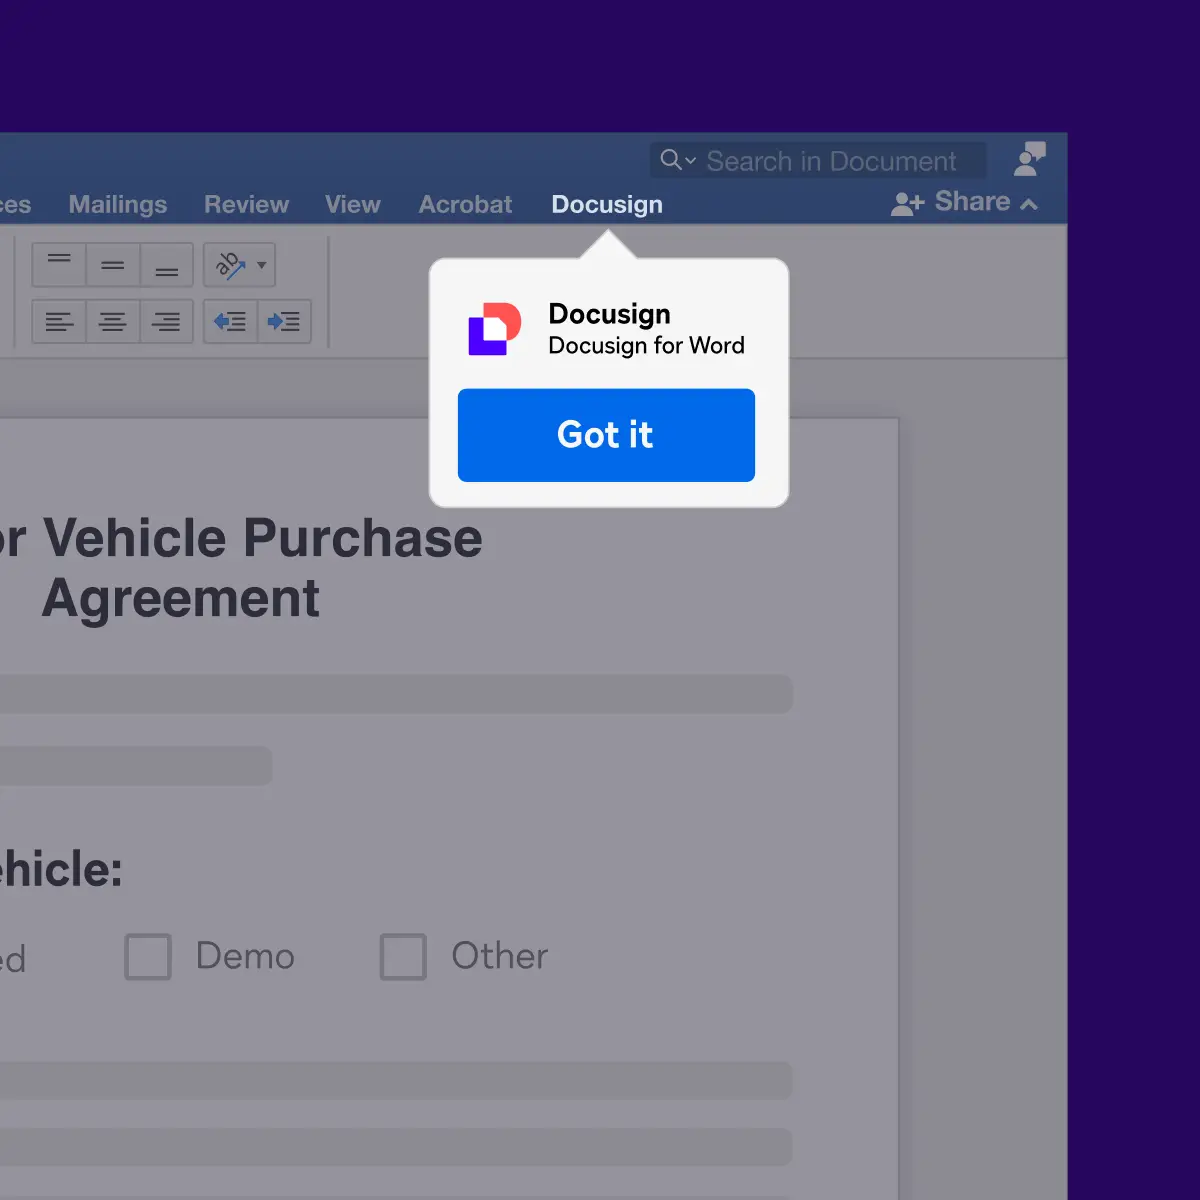 A screenshot of accessing DocuSign for Word on the go